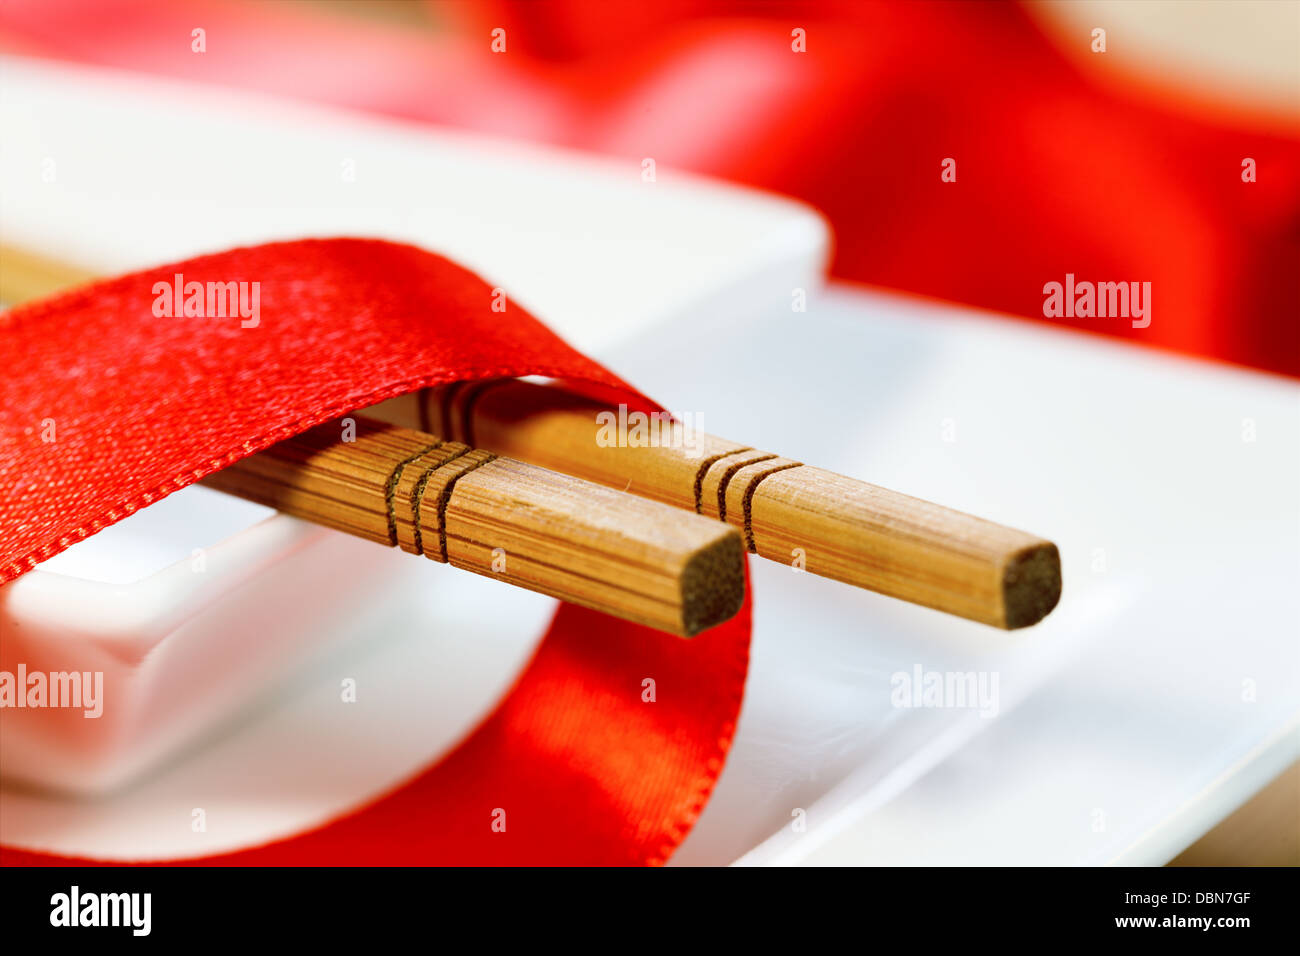 chopsticks and red tape on a plate Stock Photo